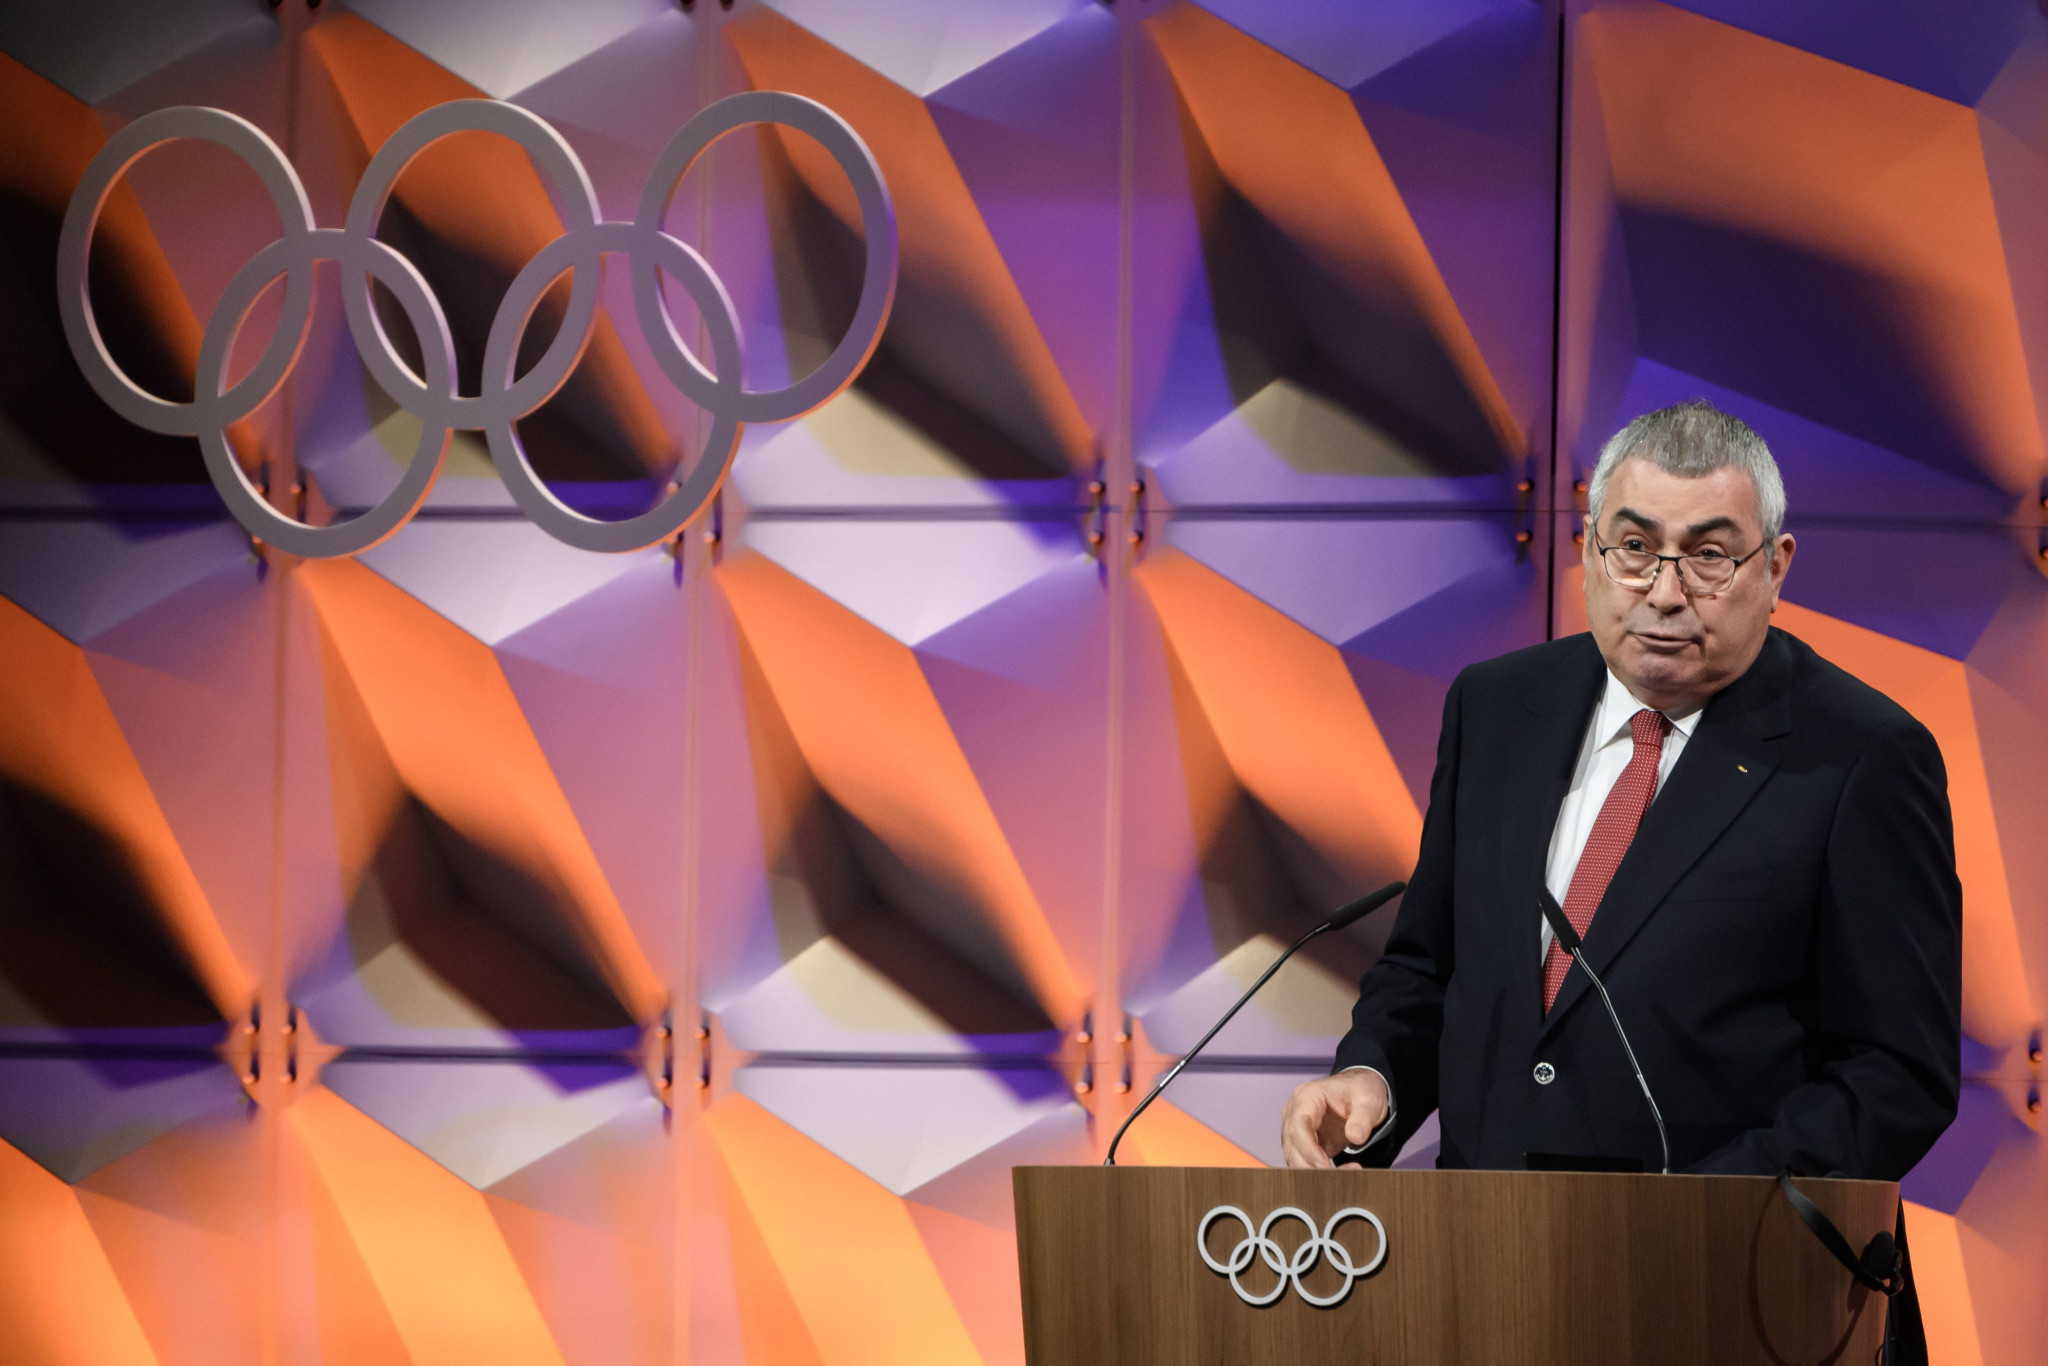 World Archery, led by IOC member Uğur Erdener, is set to decide on its policy at its next Executive Board meeting ©Getty Images